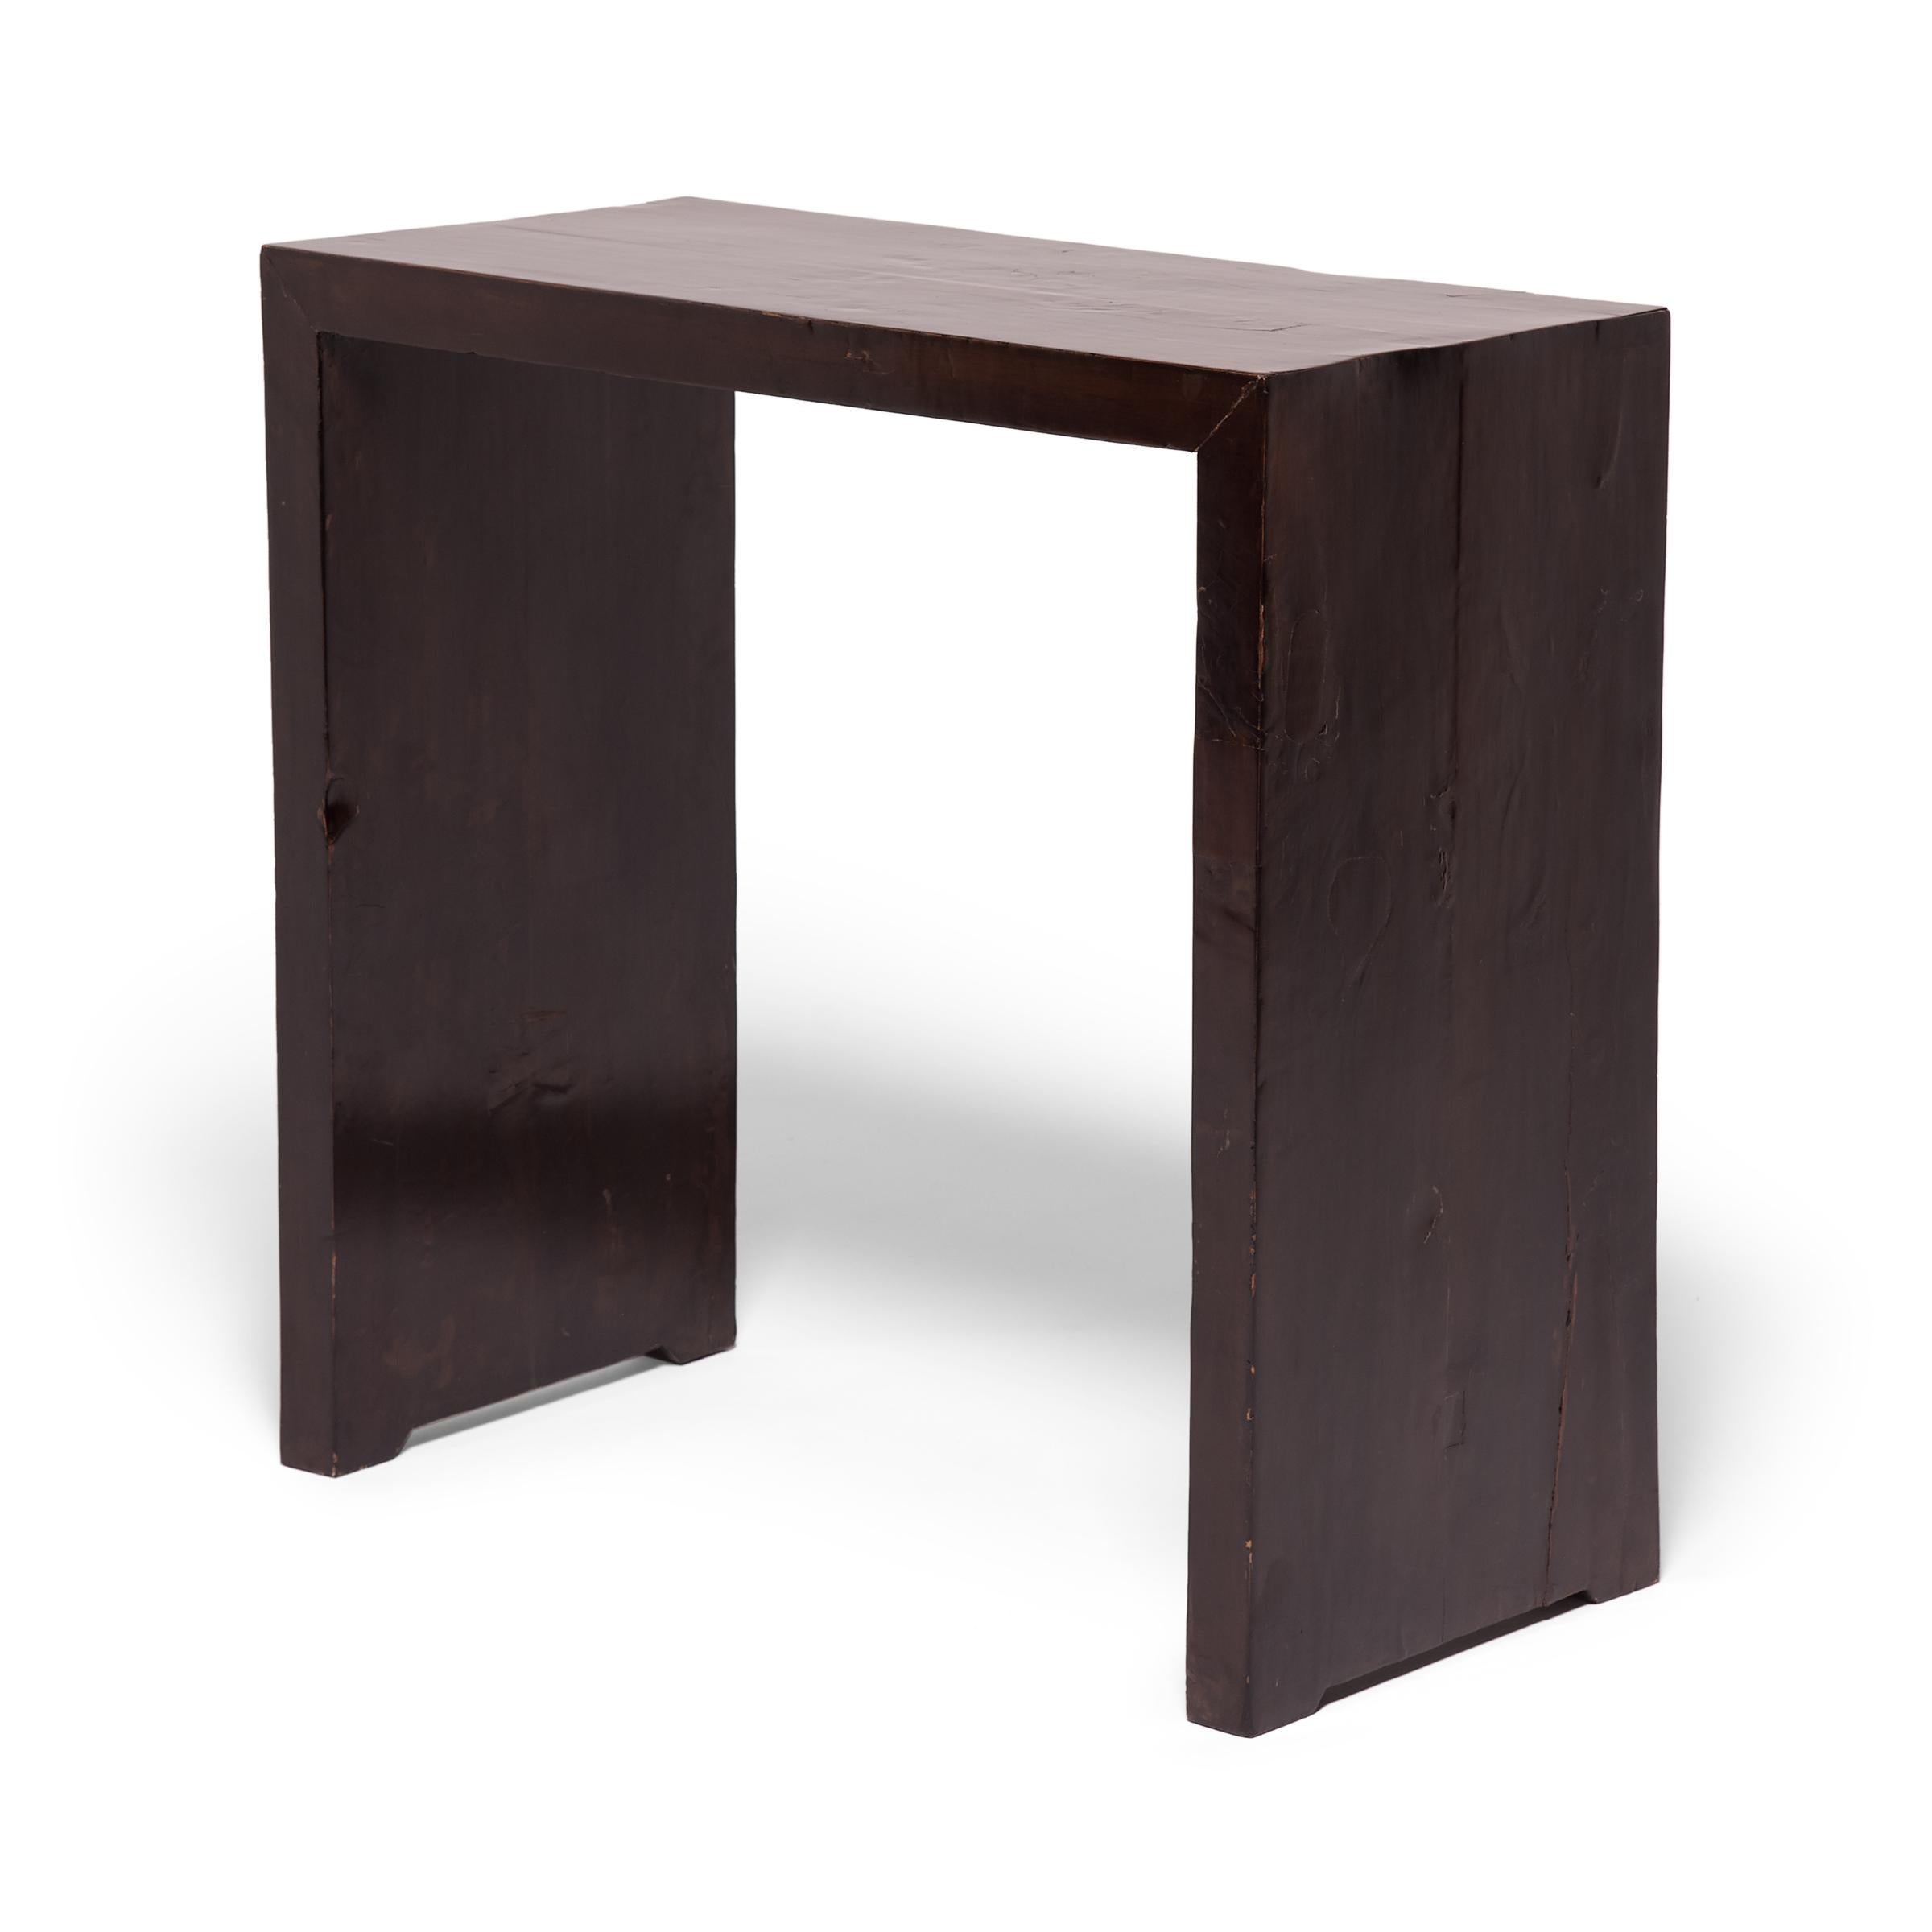 With no stretchers or spandrels, this elegantly simple table forms one beautiful, continuous ribbon the concealed joinery and fine finish add to this austere beauty. The contemporary table exudes an austere beauty, cloaked in a layer of dark lacquer